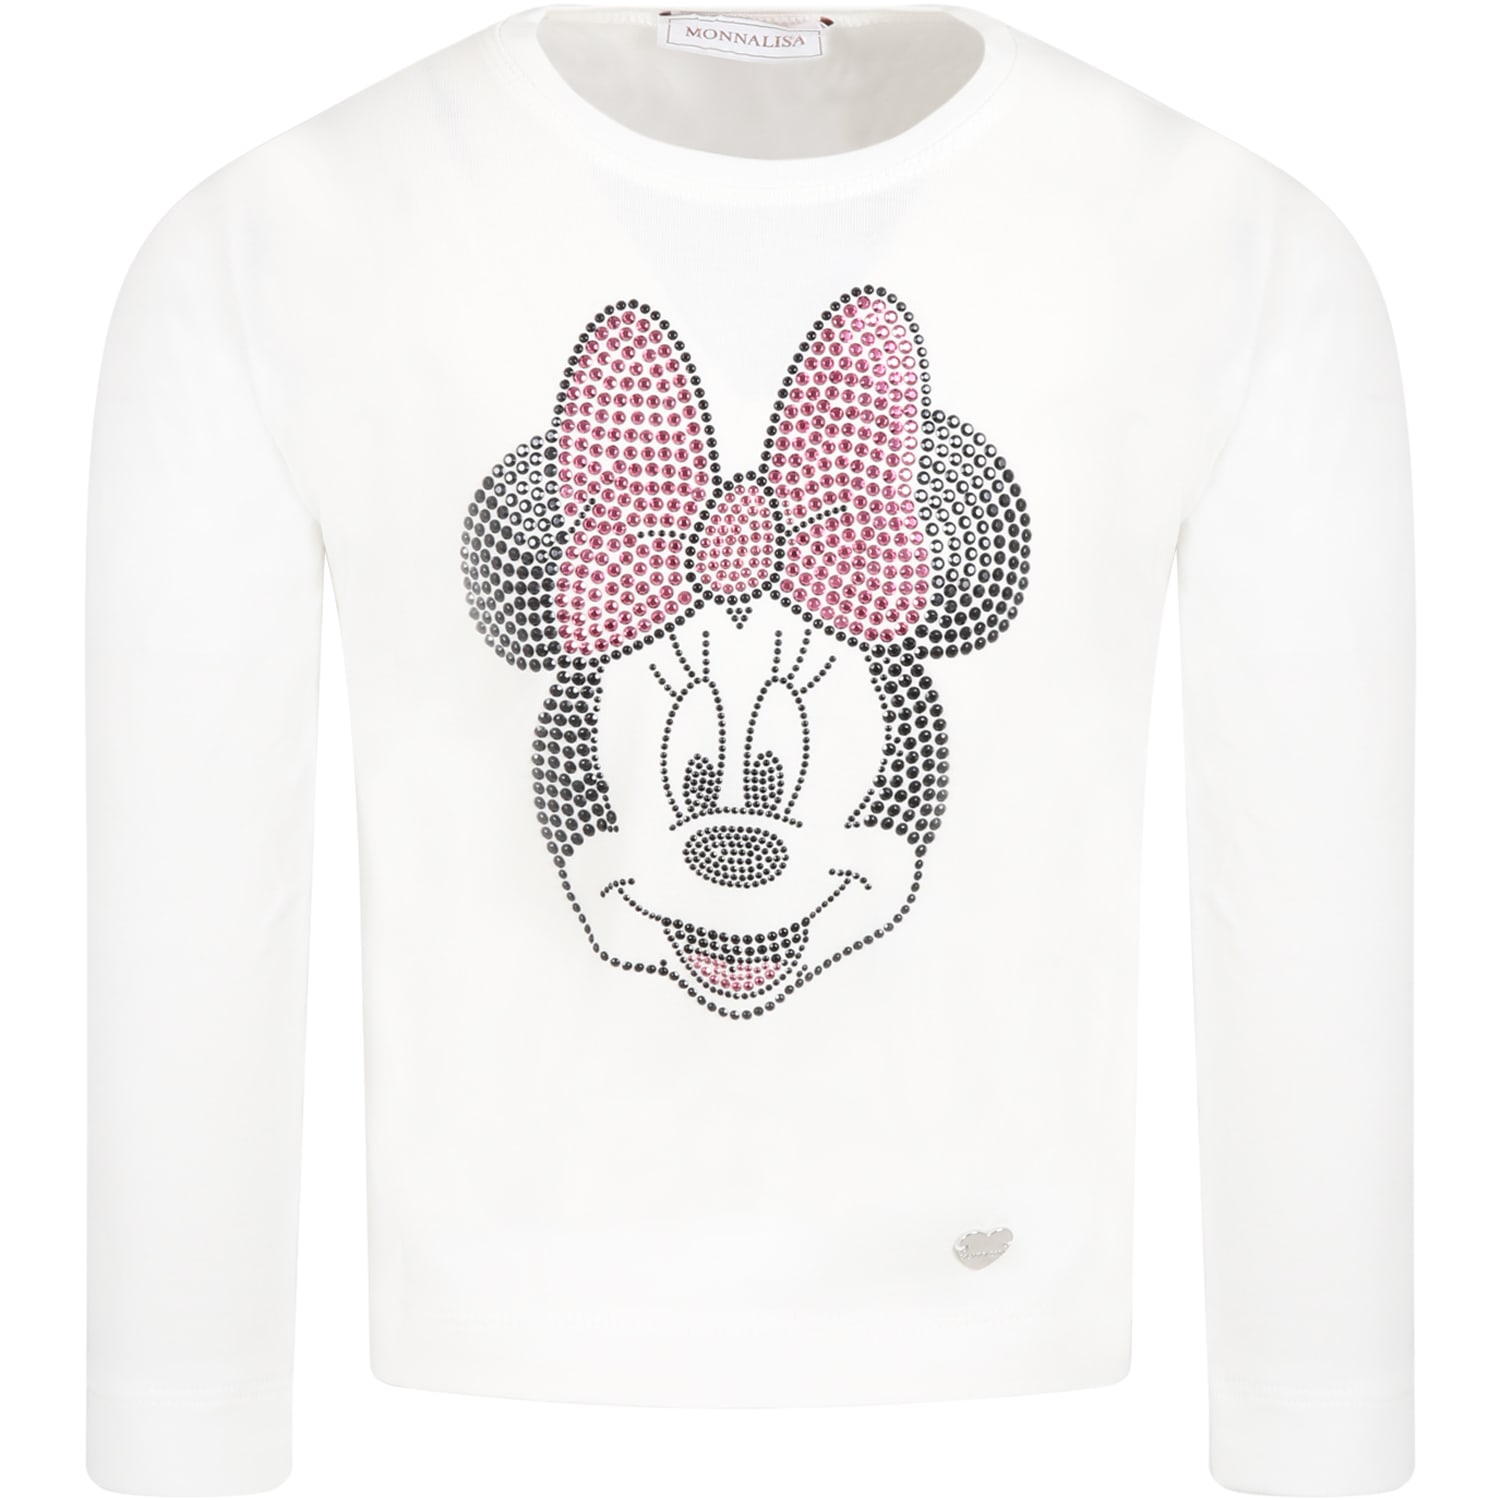 Monnalisa White T-shirt For Girl With Minnie Mouse